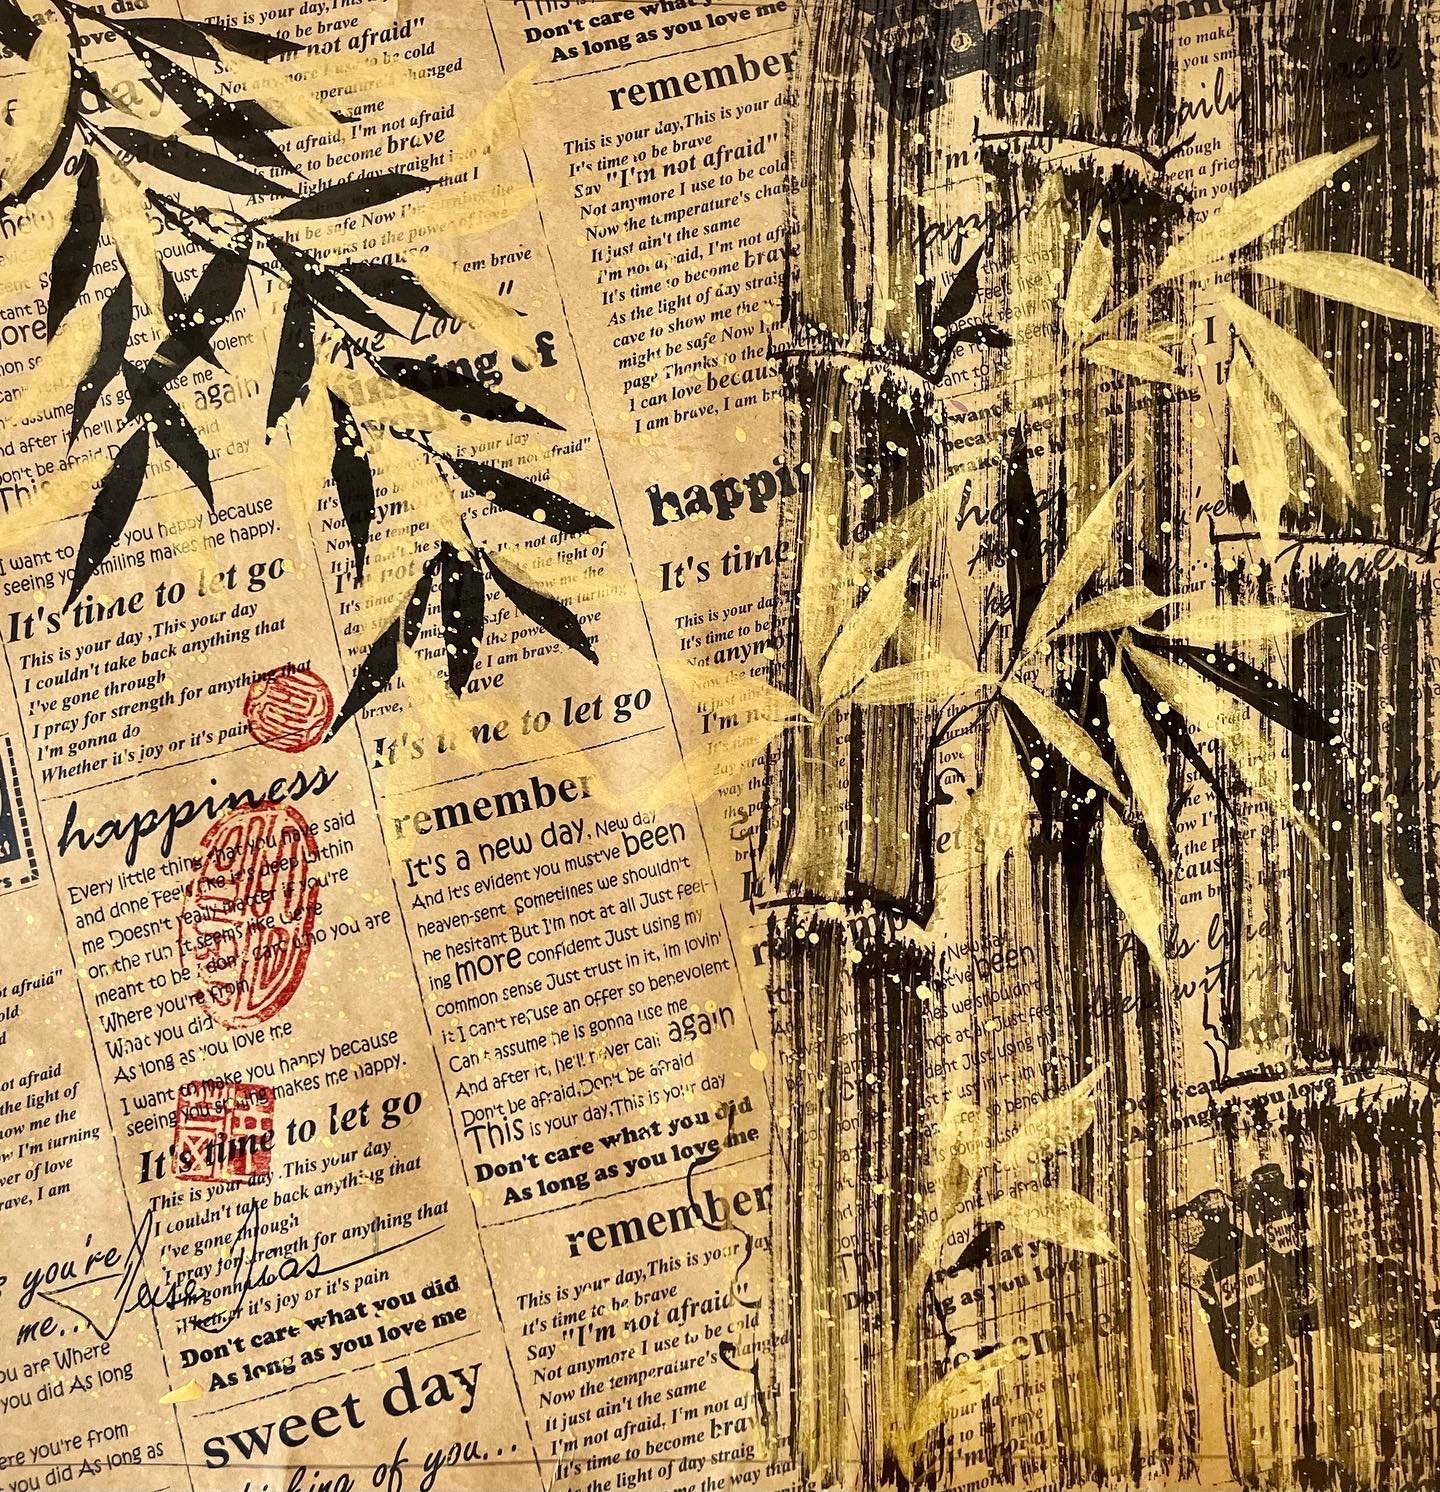 Ink and gold on printed paper. Size: 32x35

Come and visit me this weekend to see this work and many more . 
I will be happy to see you ! 

Visit my site www.deisedias.com

#chinesebrushpainting
#bamboos
#bambus
#ilovepainting
#galeries
#beautifulthi